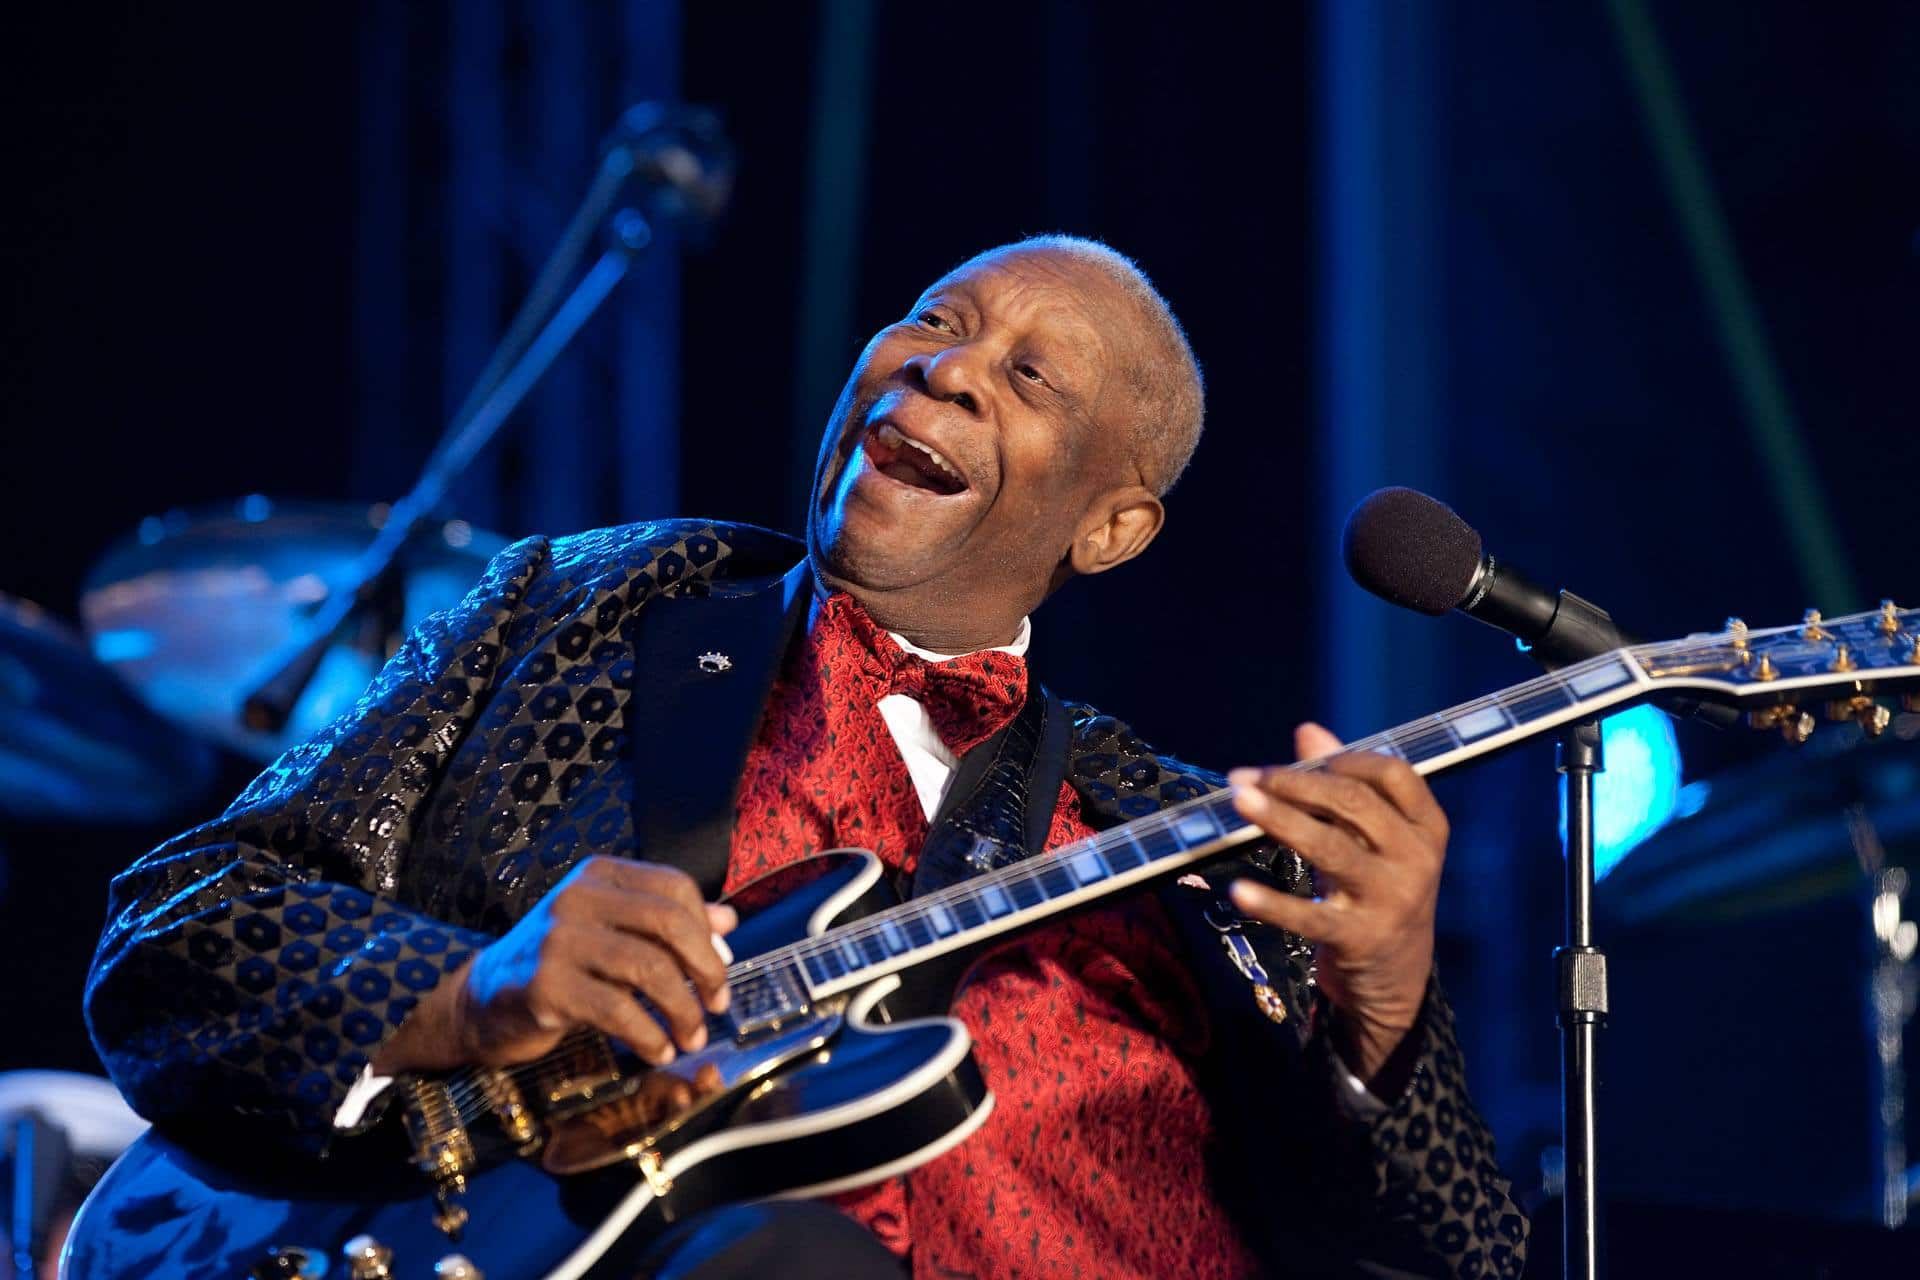 BB King performs "Merry Christmas Baby" at the National Christmas Tree Lighting ceremony on the Ellipse in Washington, D.C